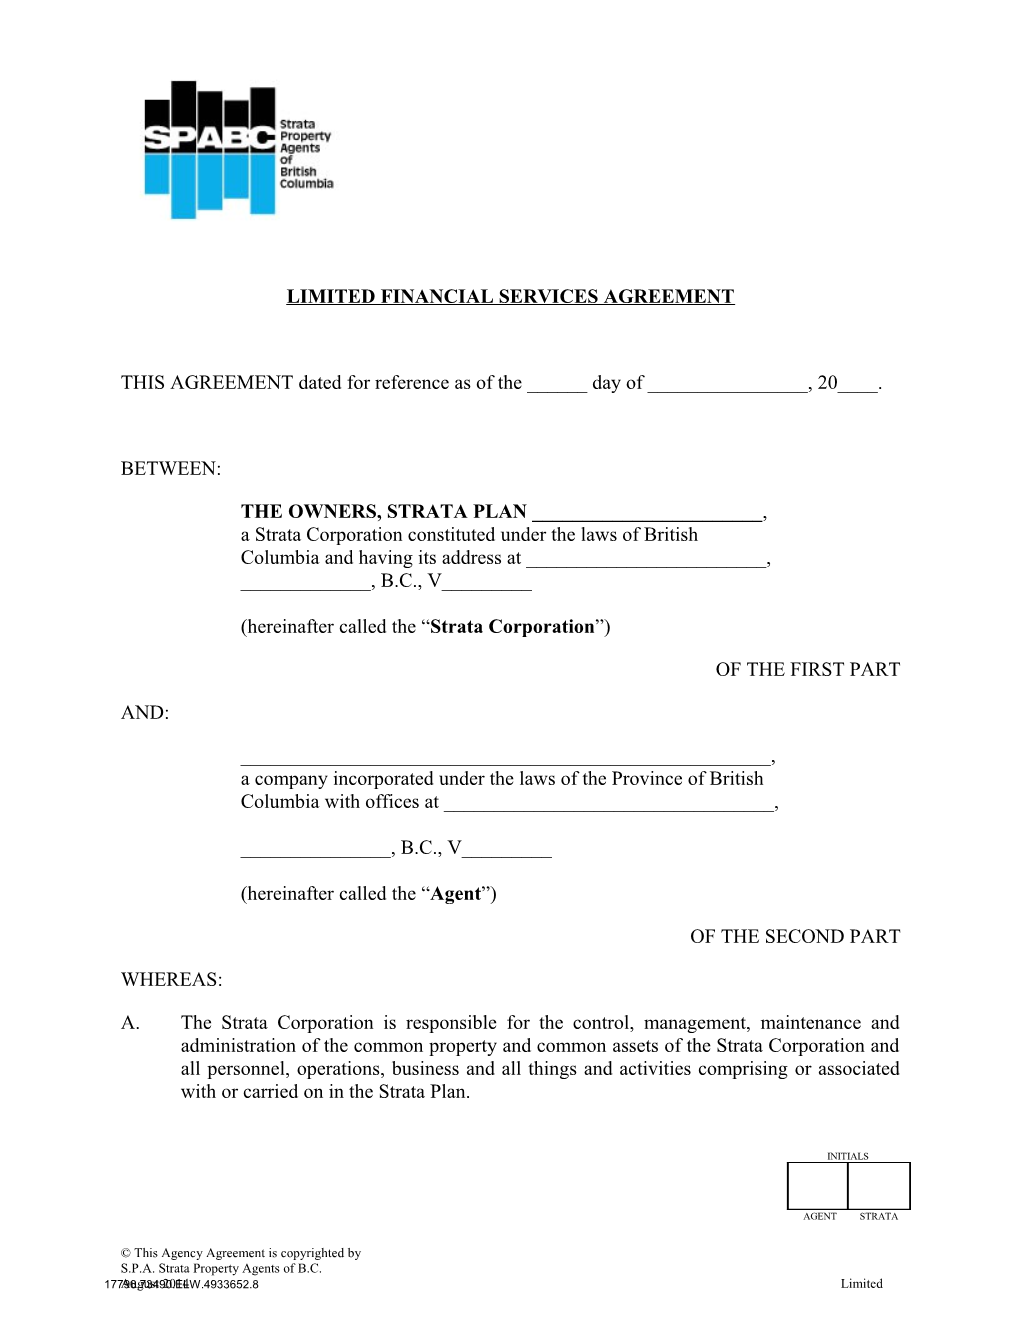 Limited Financial Services Agreement